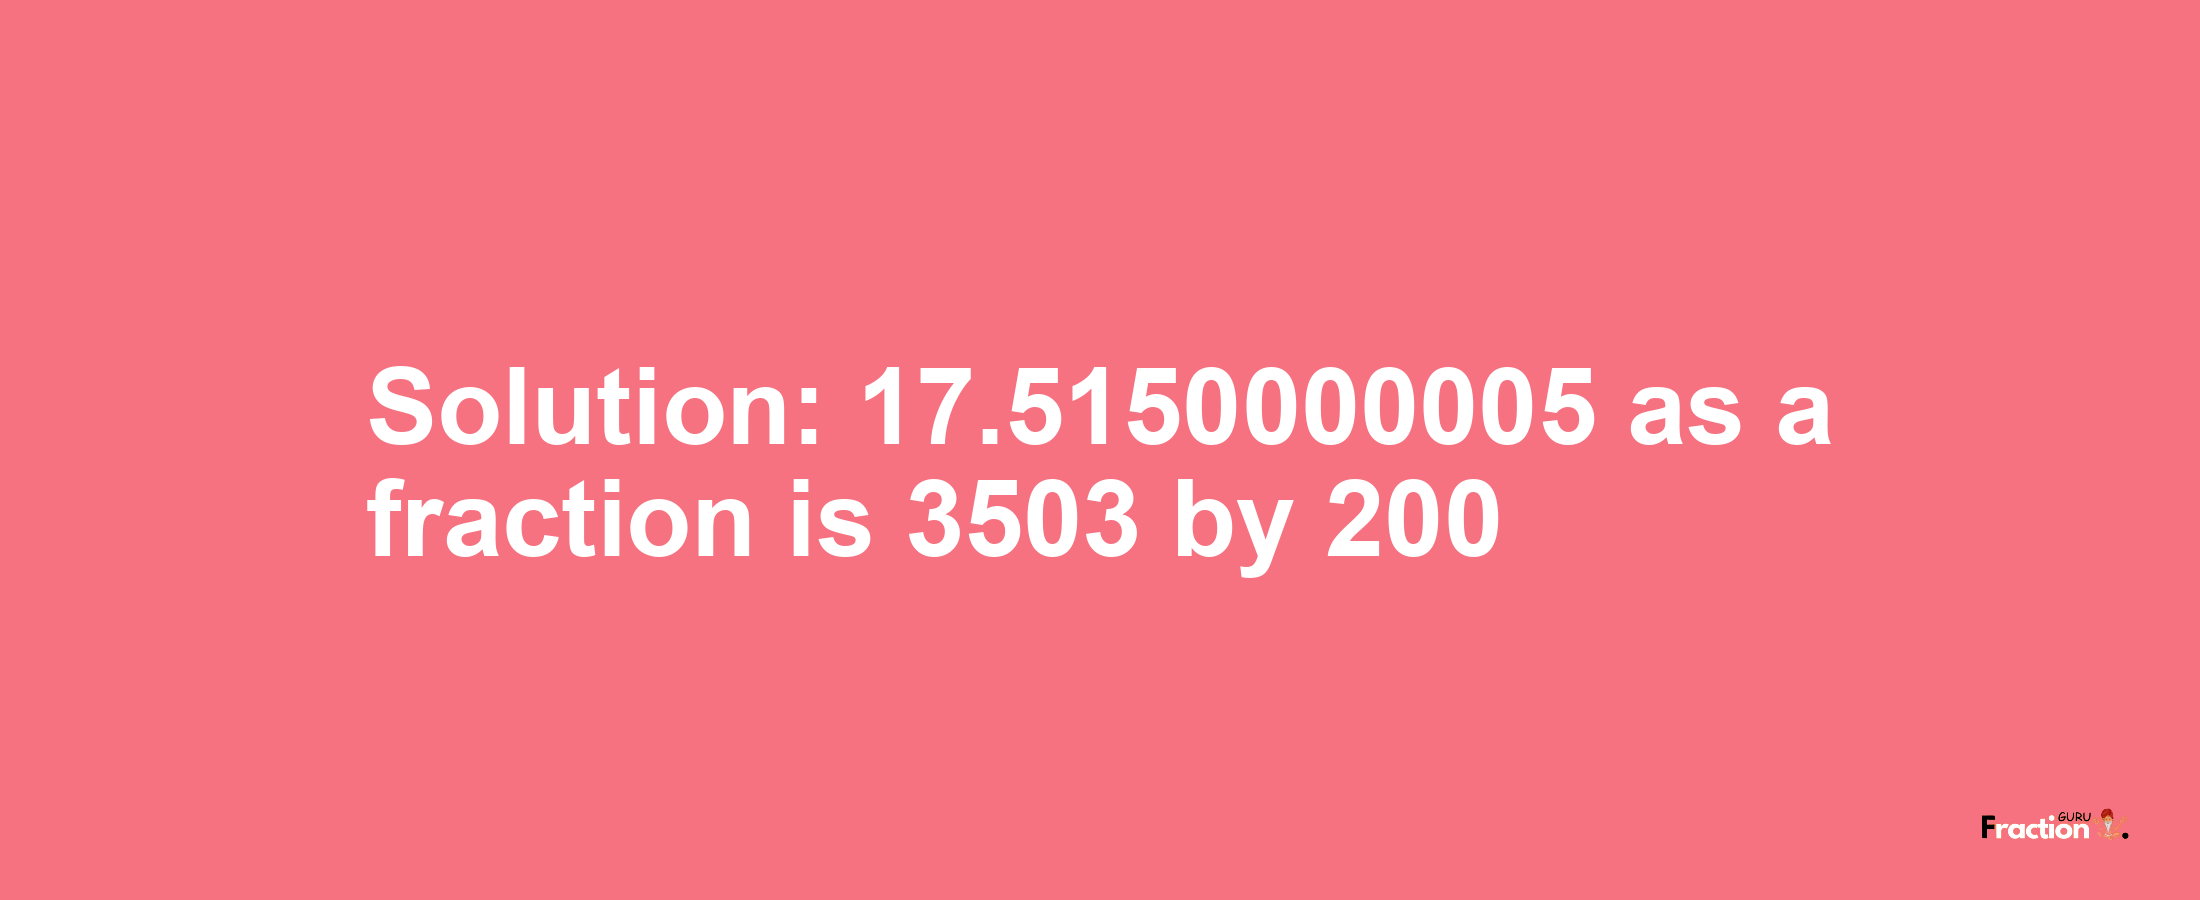 Solution:17.5150000005 as a fraction is 3503/200